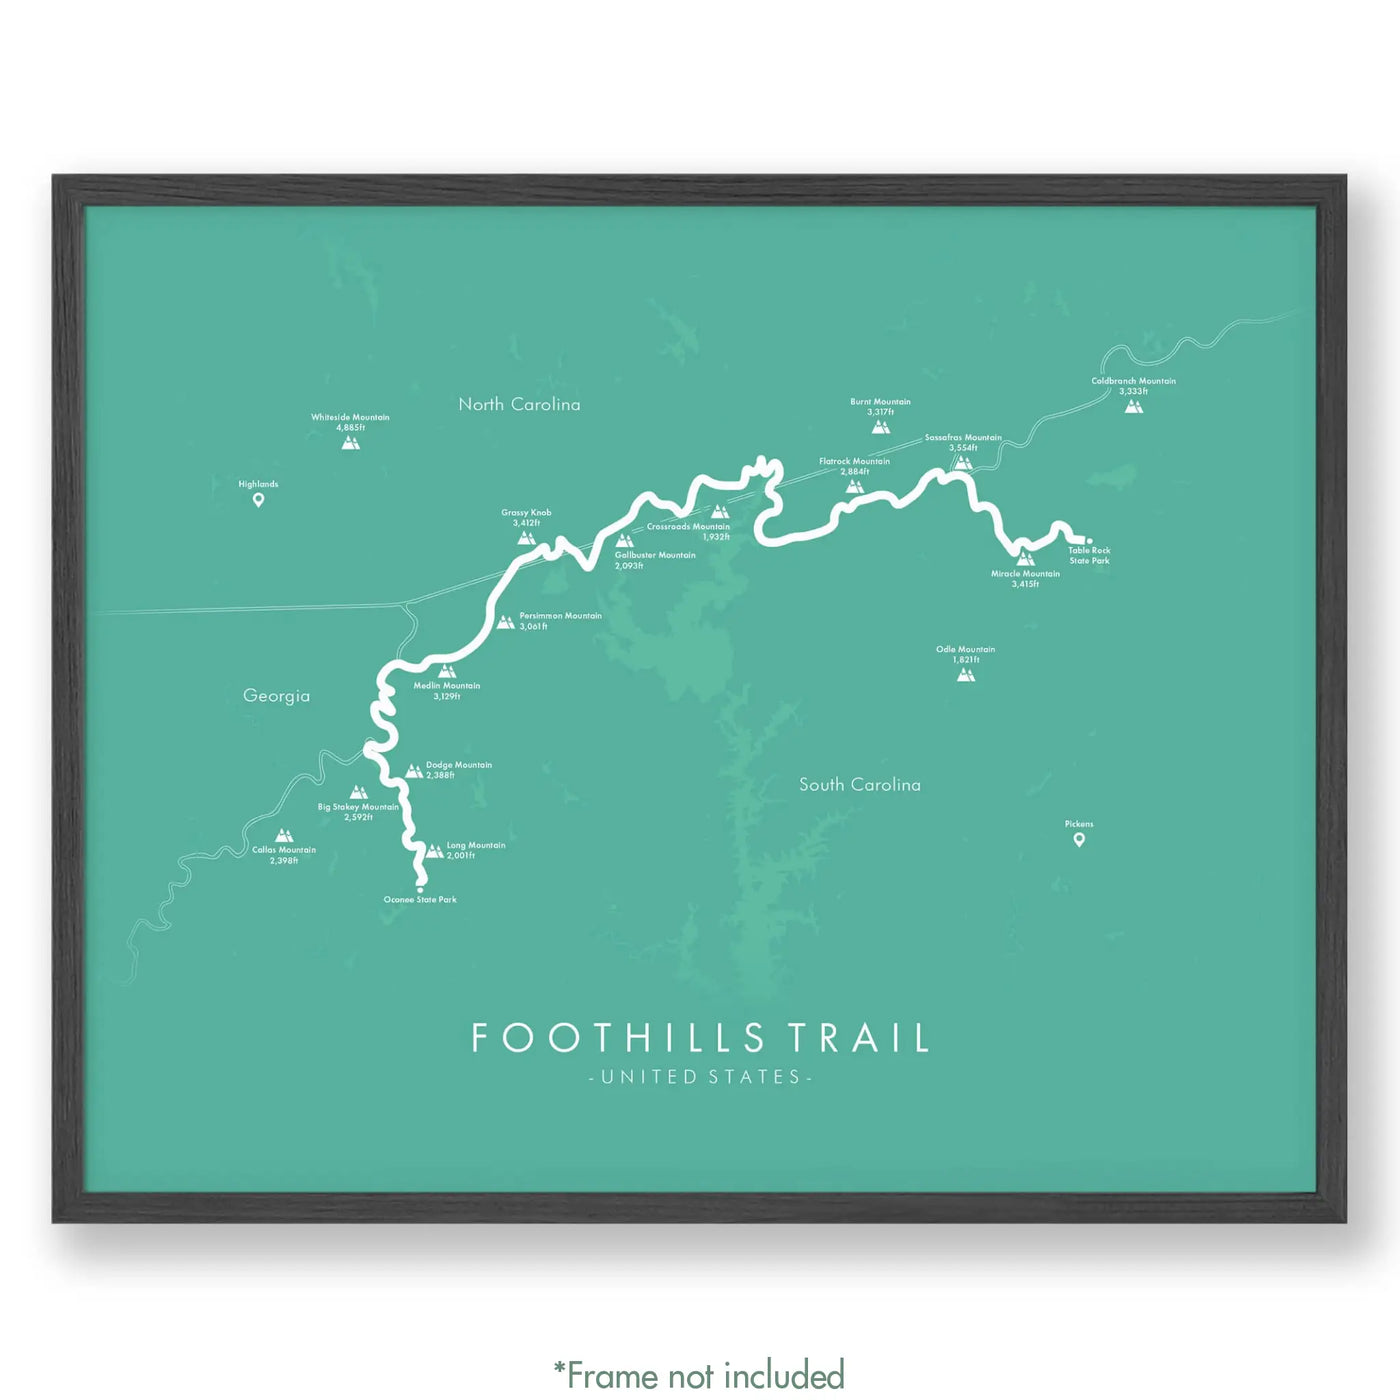 Trail Poster of Foothills Trail - Teal